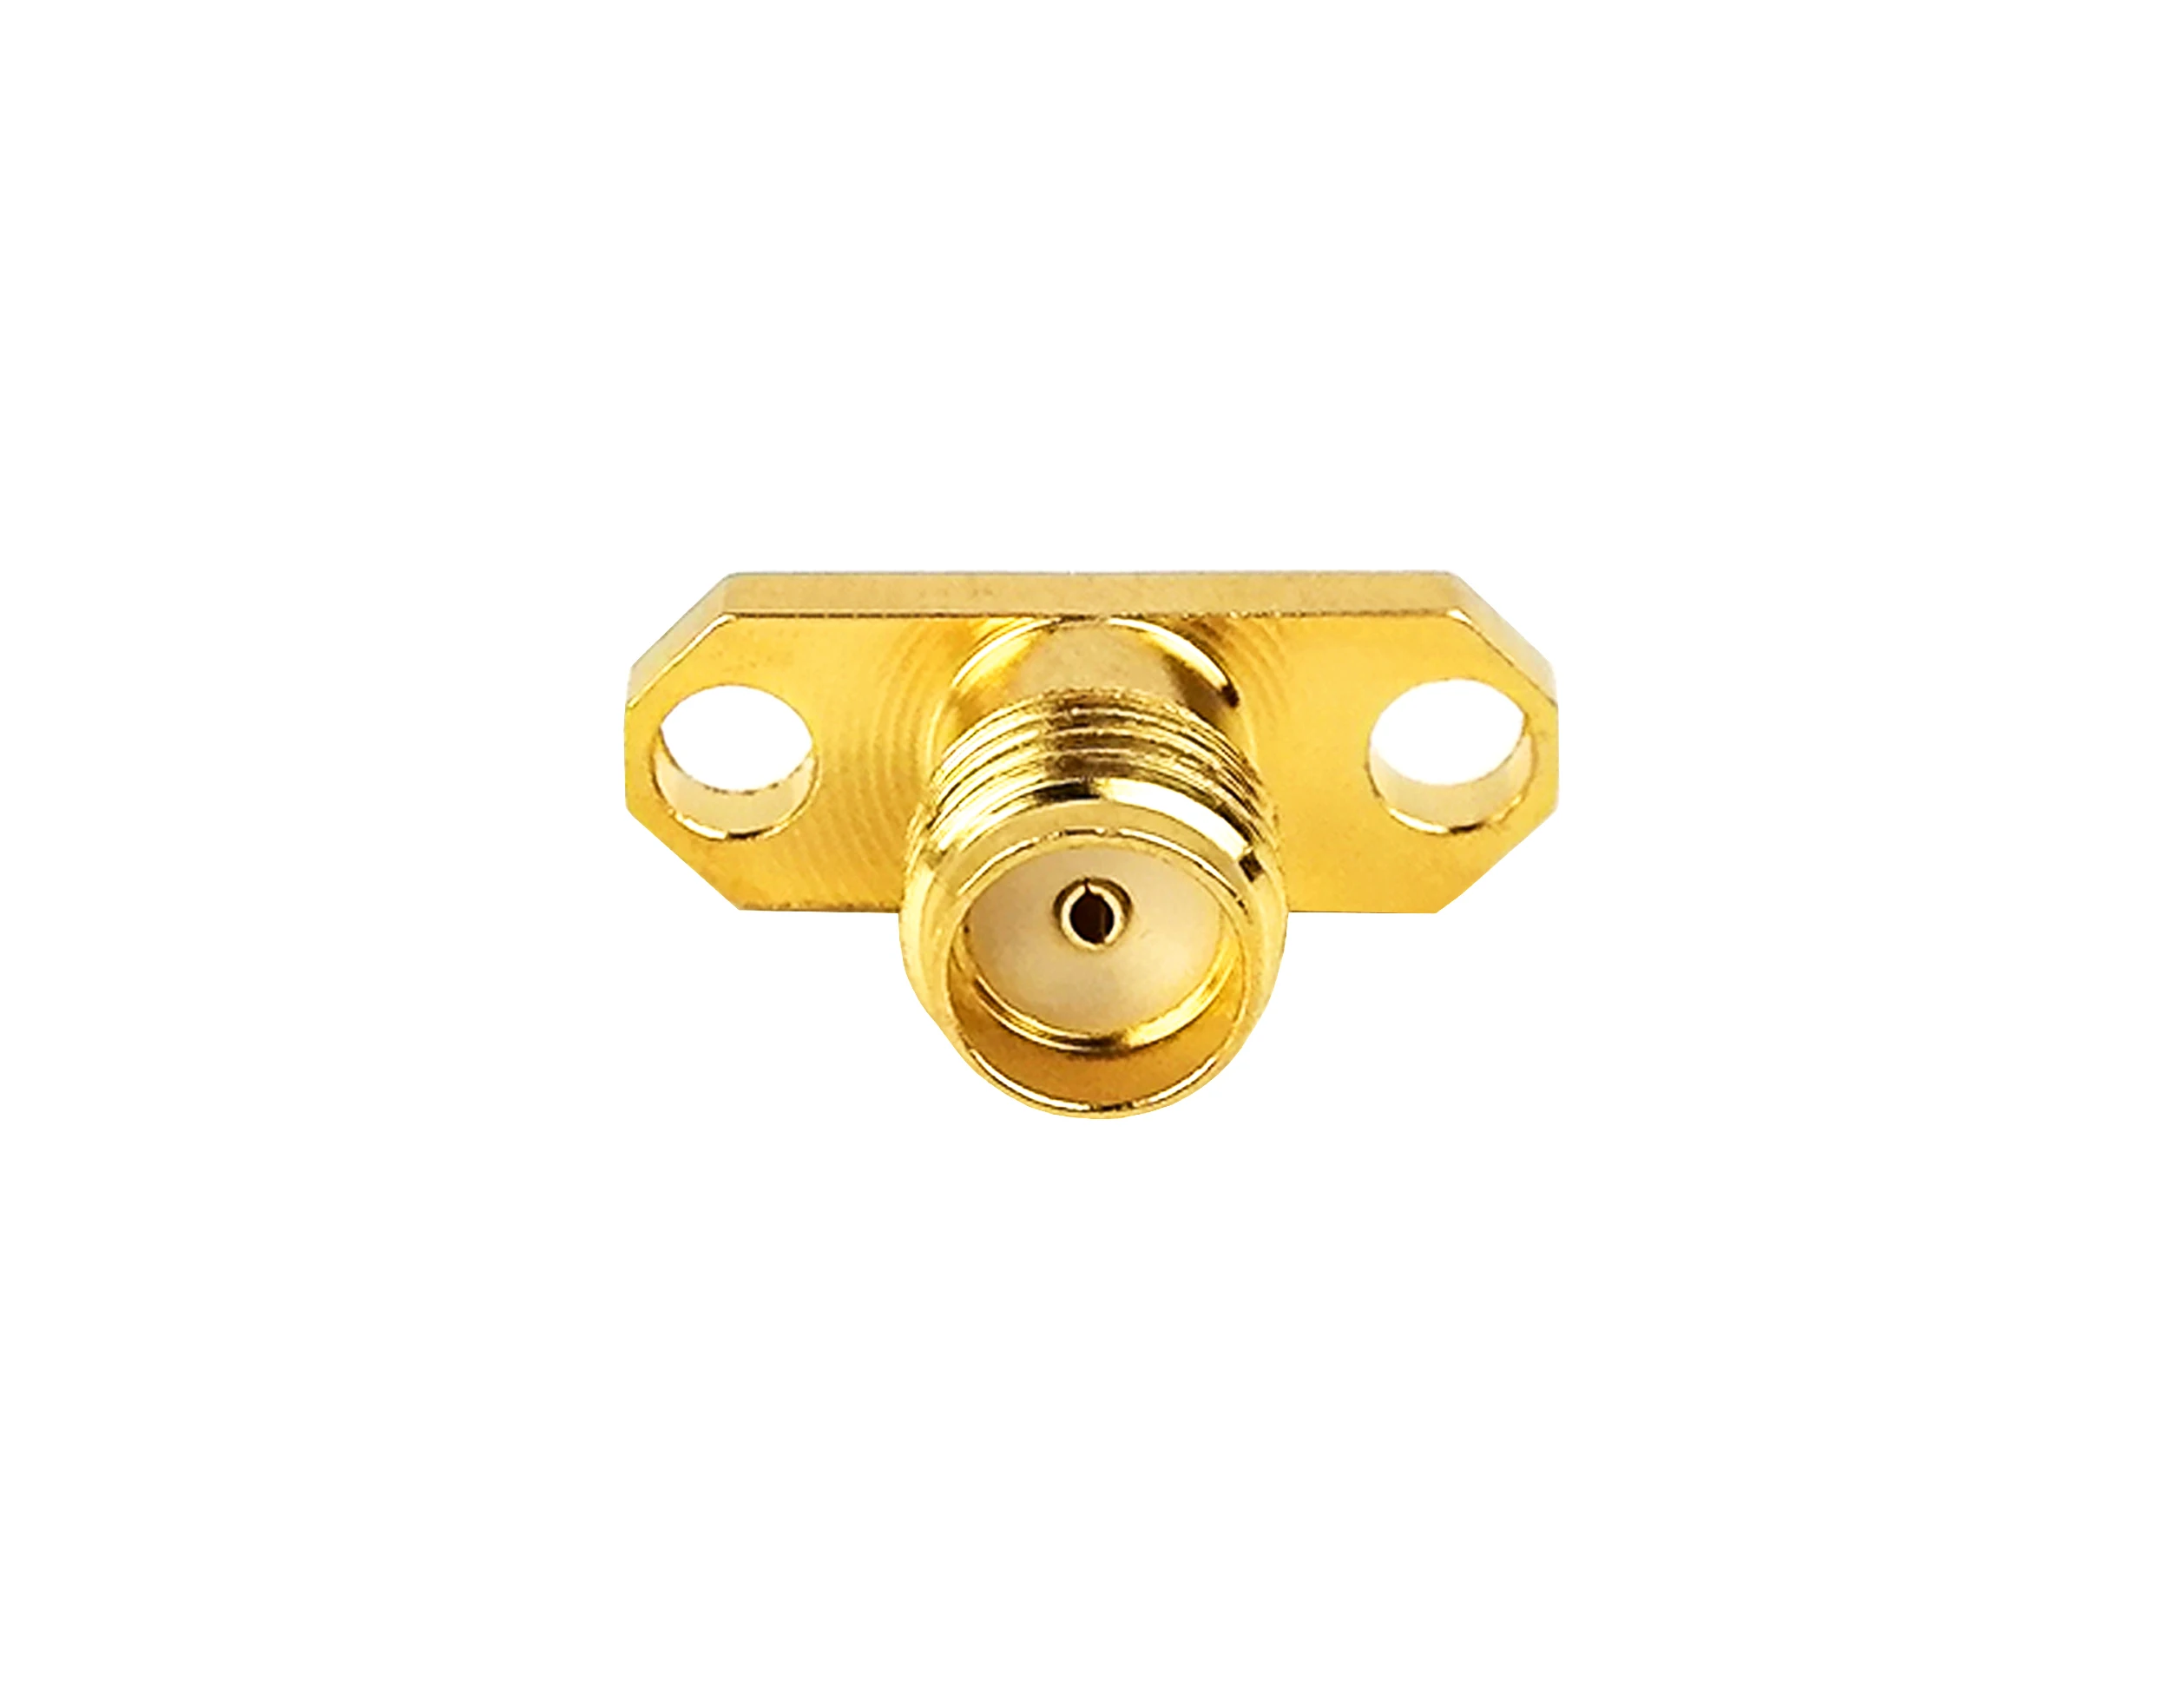 SMA Gold plated  sma female jack 2 hole flange pcb conector rf coaxial connectors manufacture